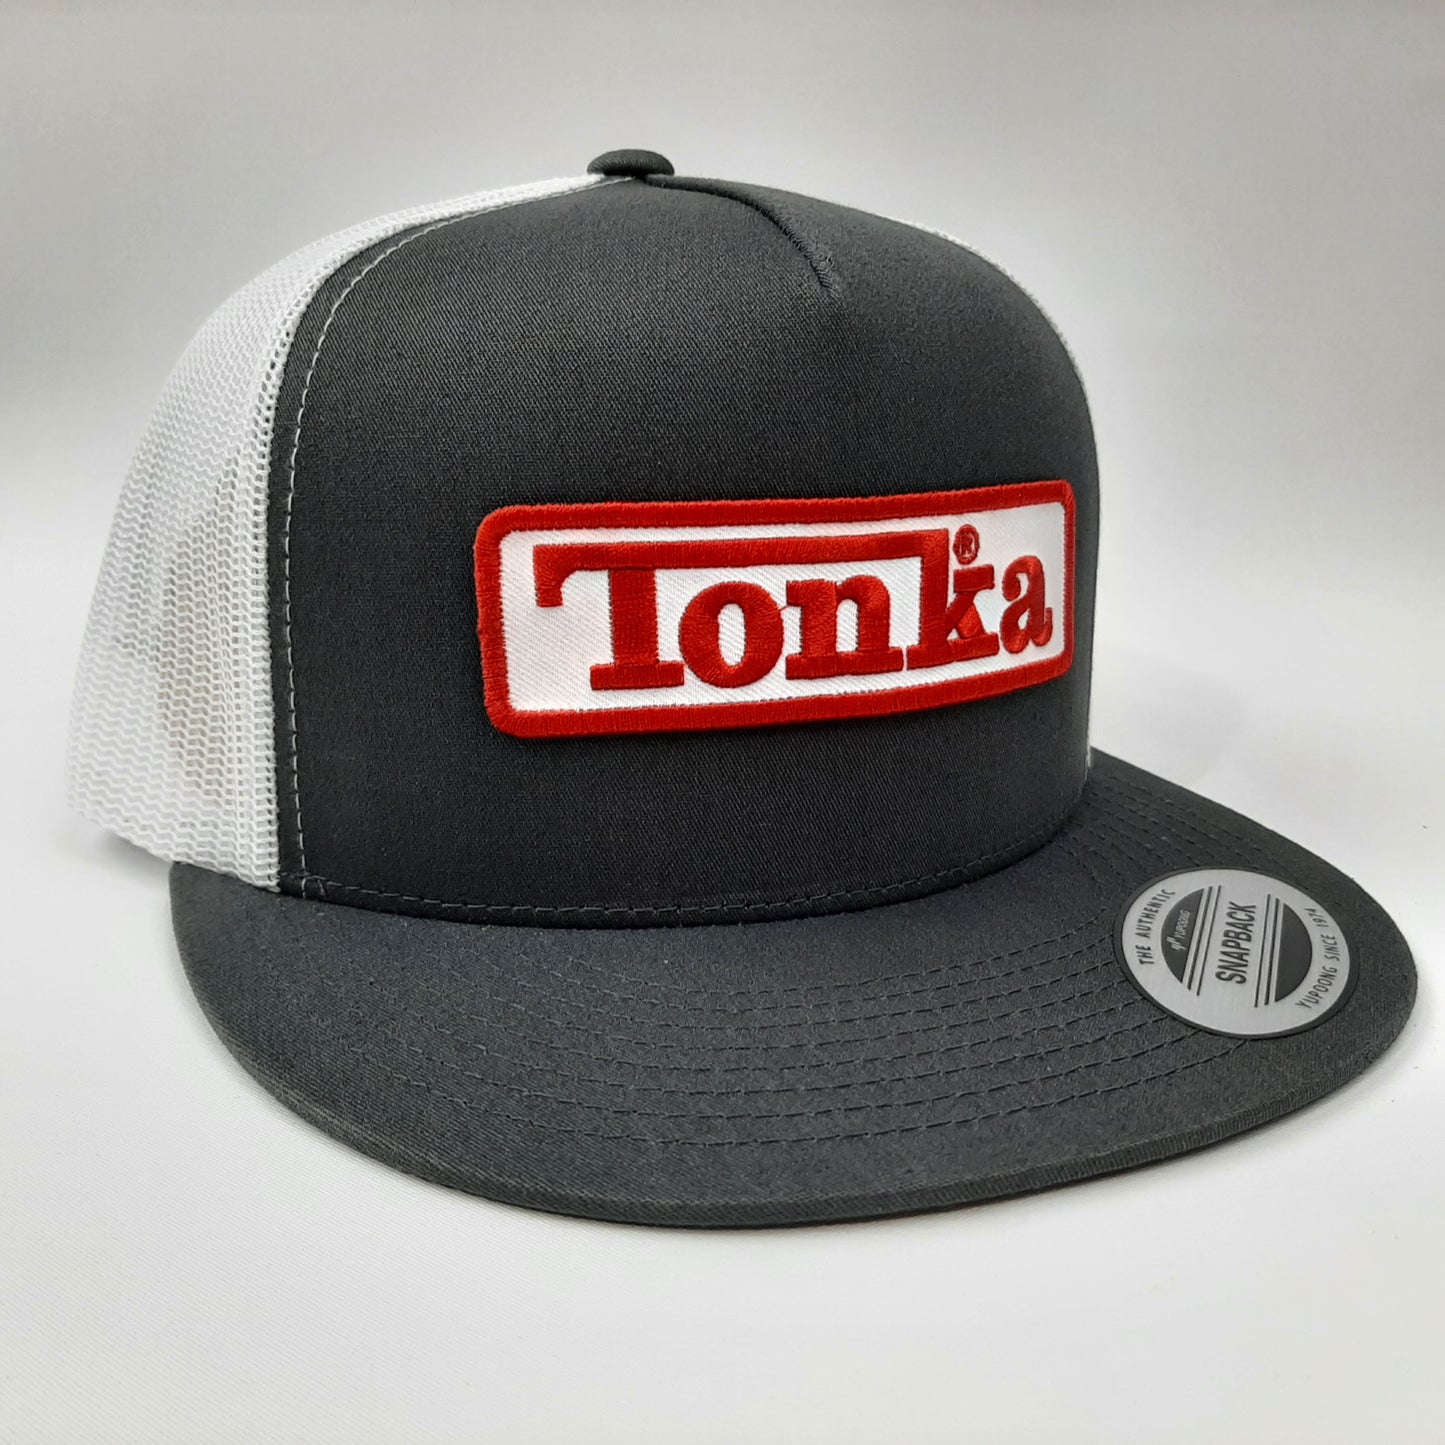 Tonka Embroidered Patch Flat Bill Snapback Mesh Hat Cap Gray & White